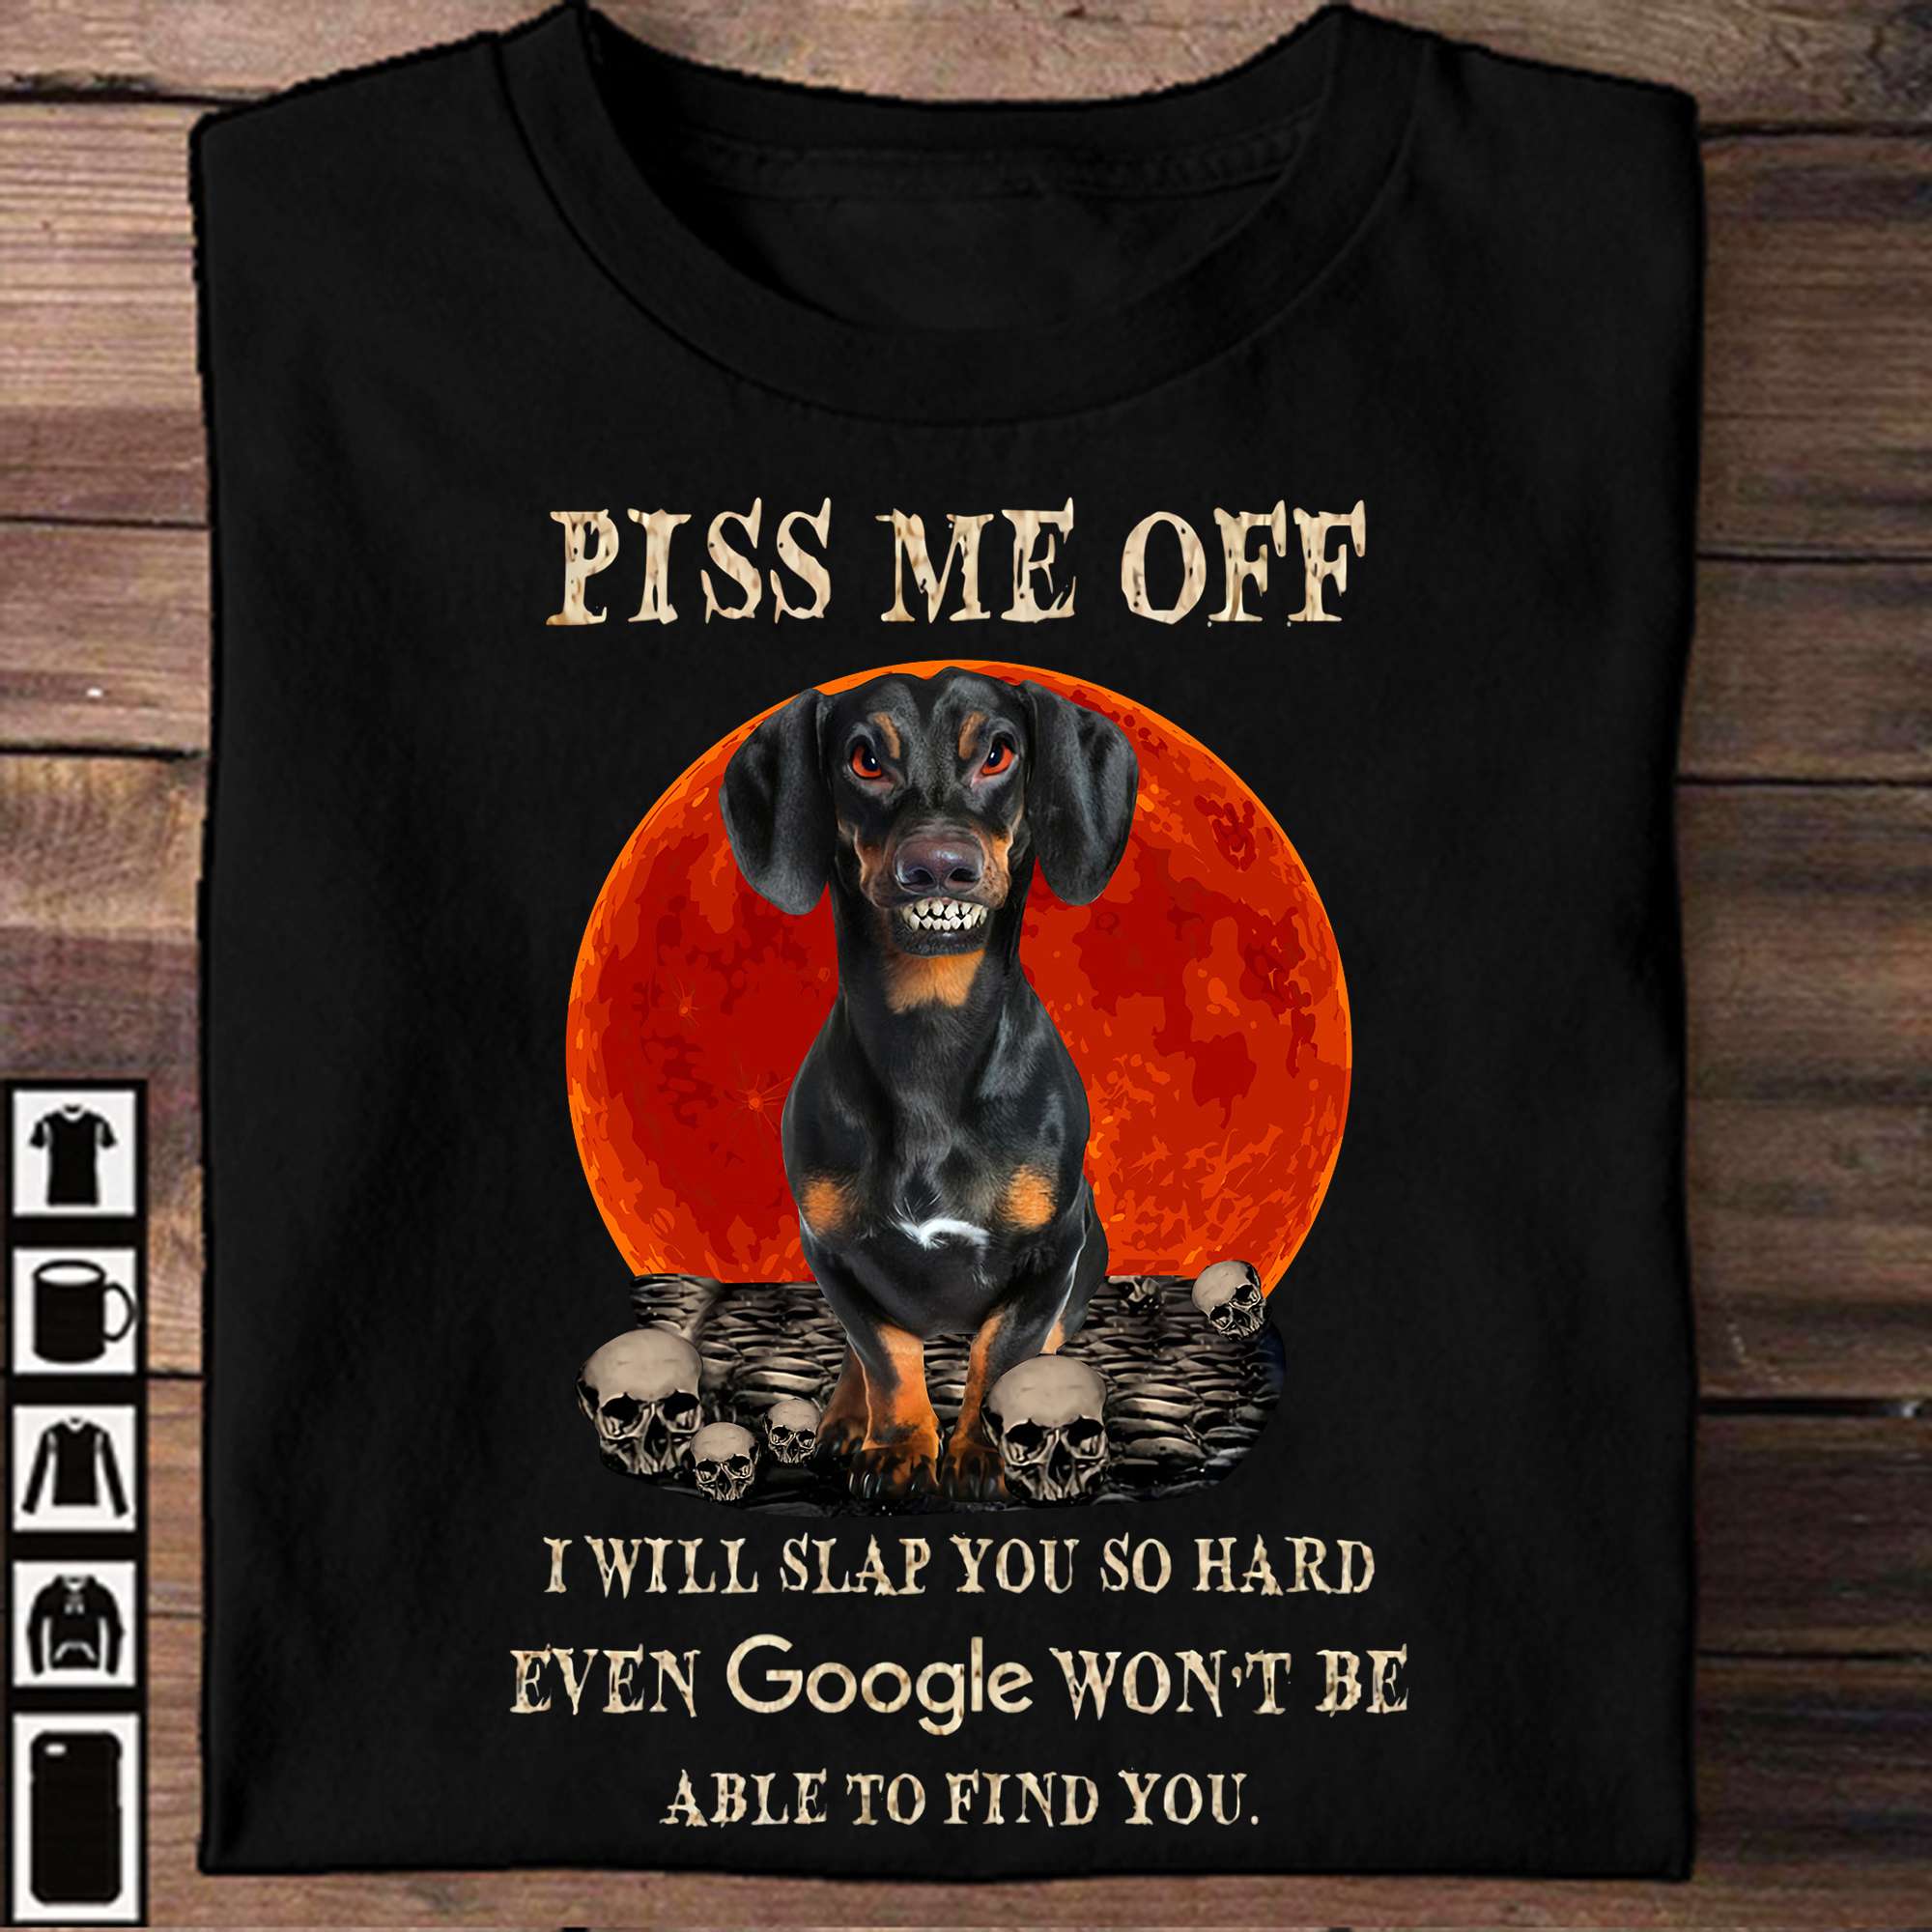 Piss me off I will slap you so hard even google won't be able to find you - Evil Dachshund dog, happy halloween